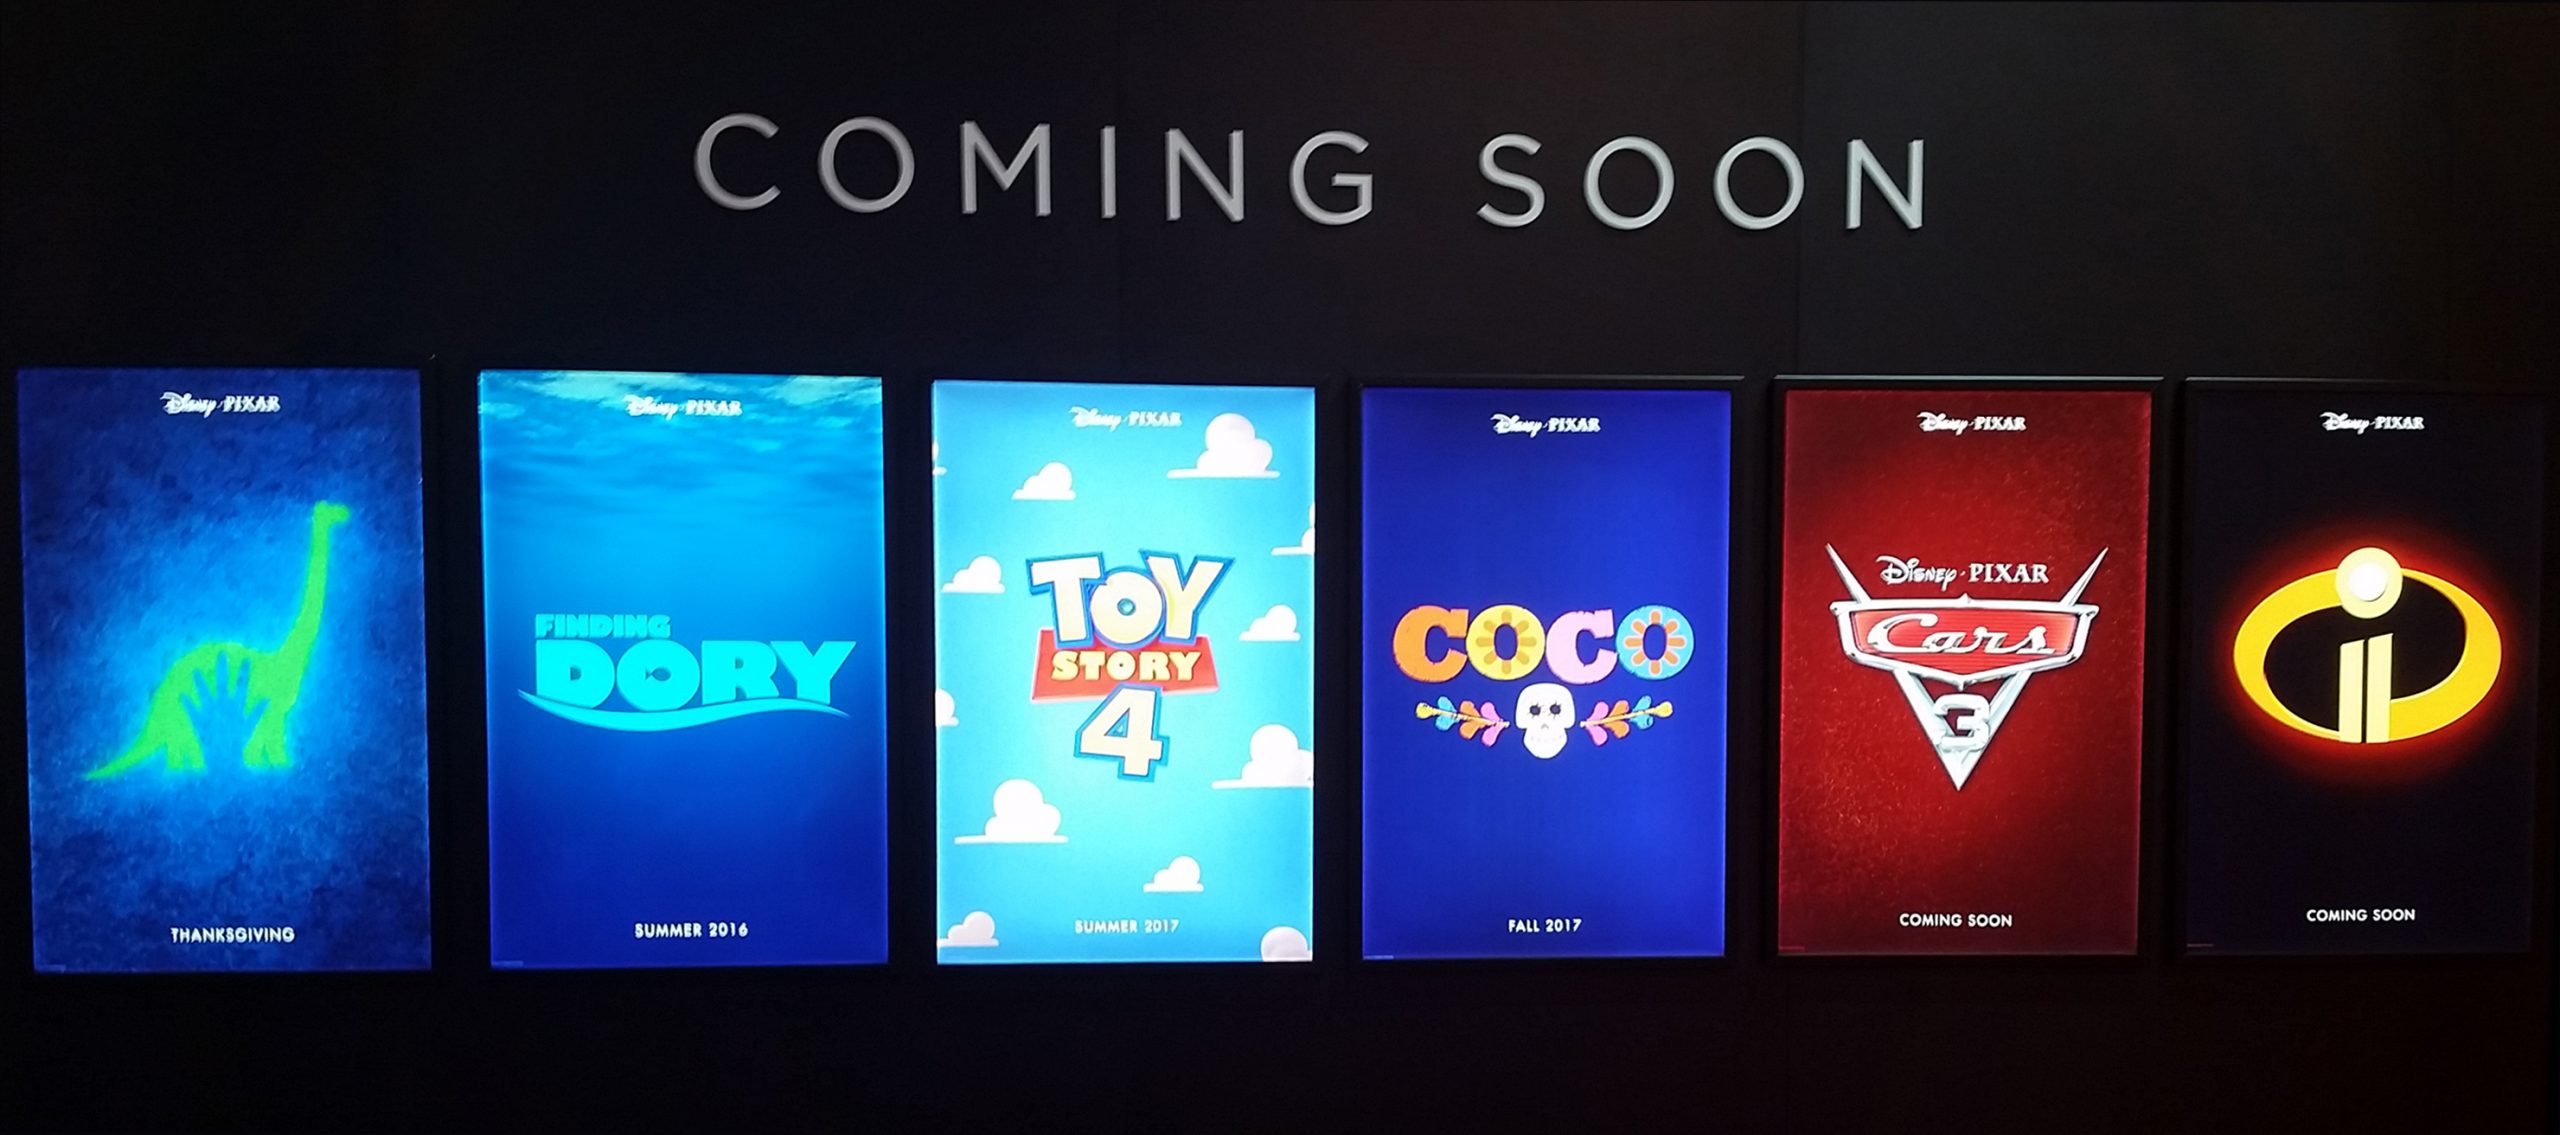 D23: The Full Poster Lineup for Pixar's Upcoming Slate